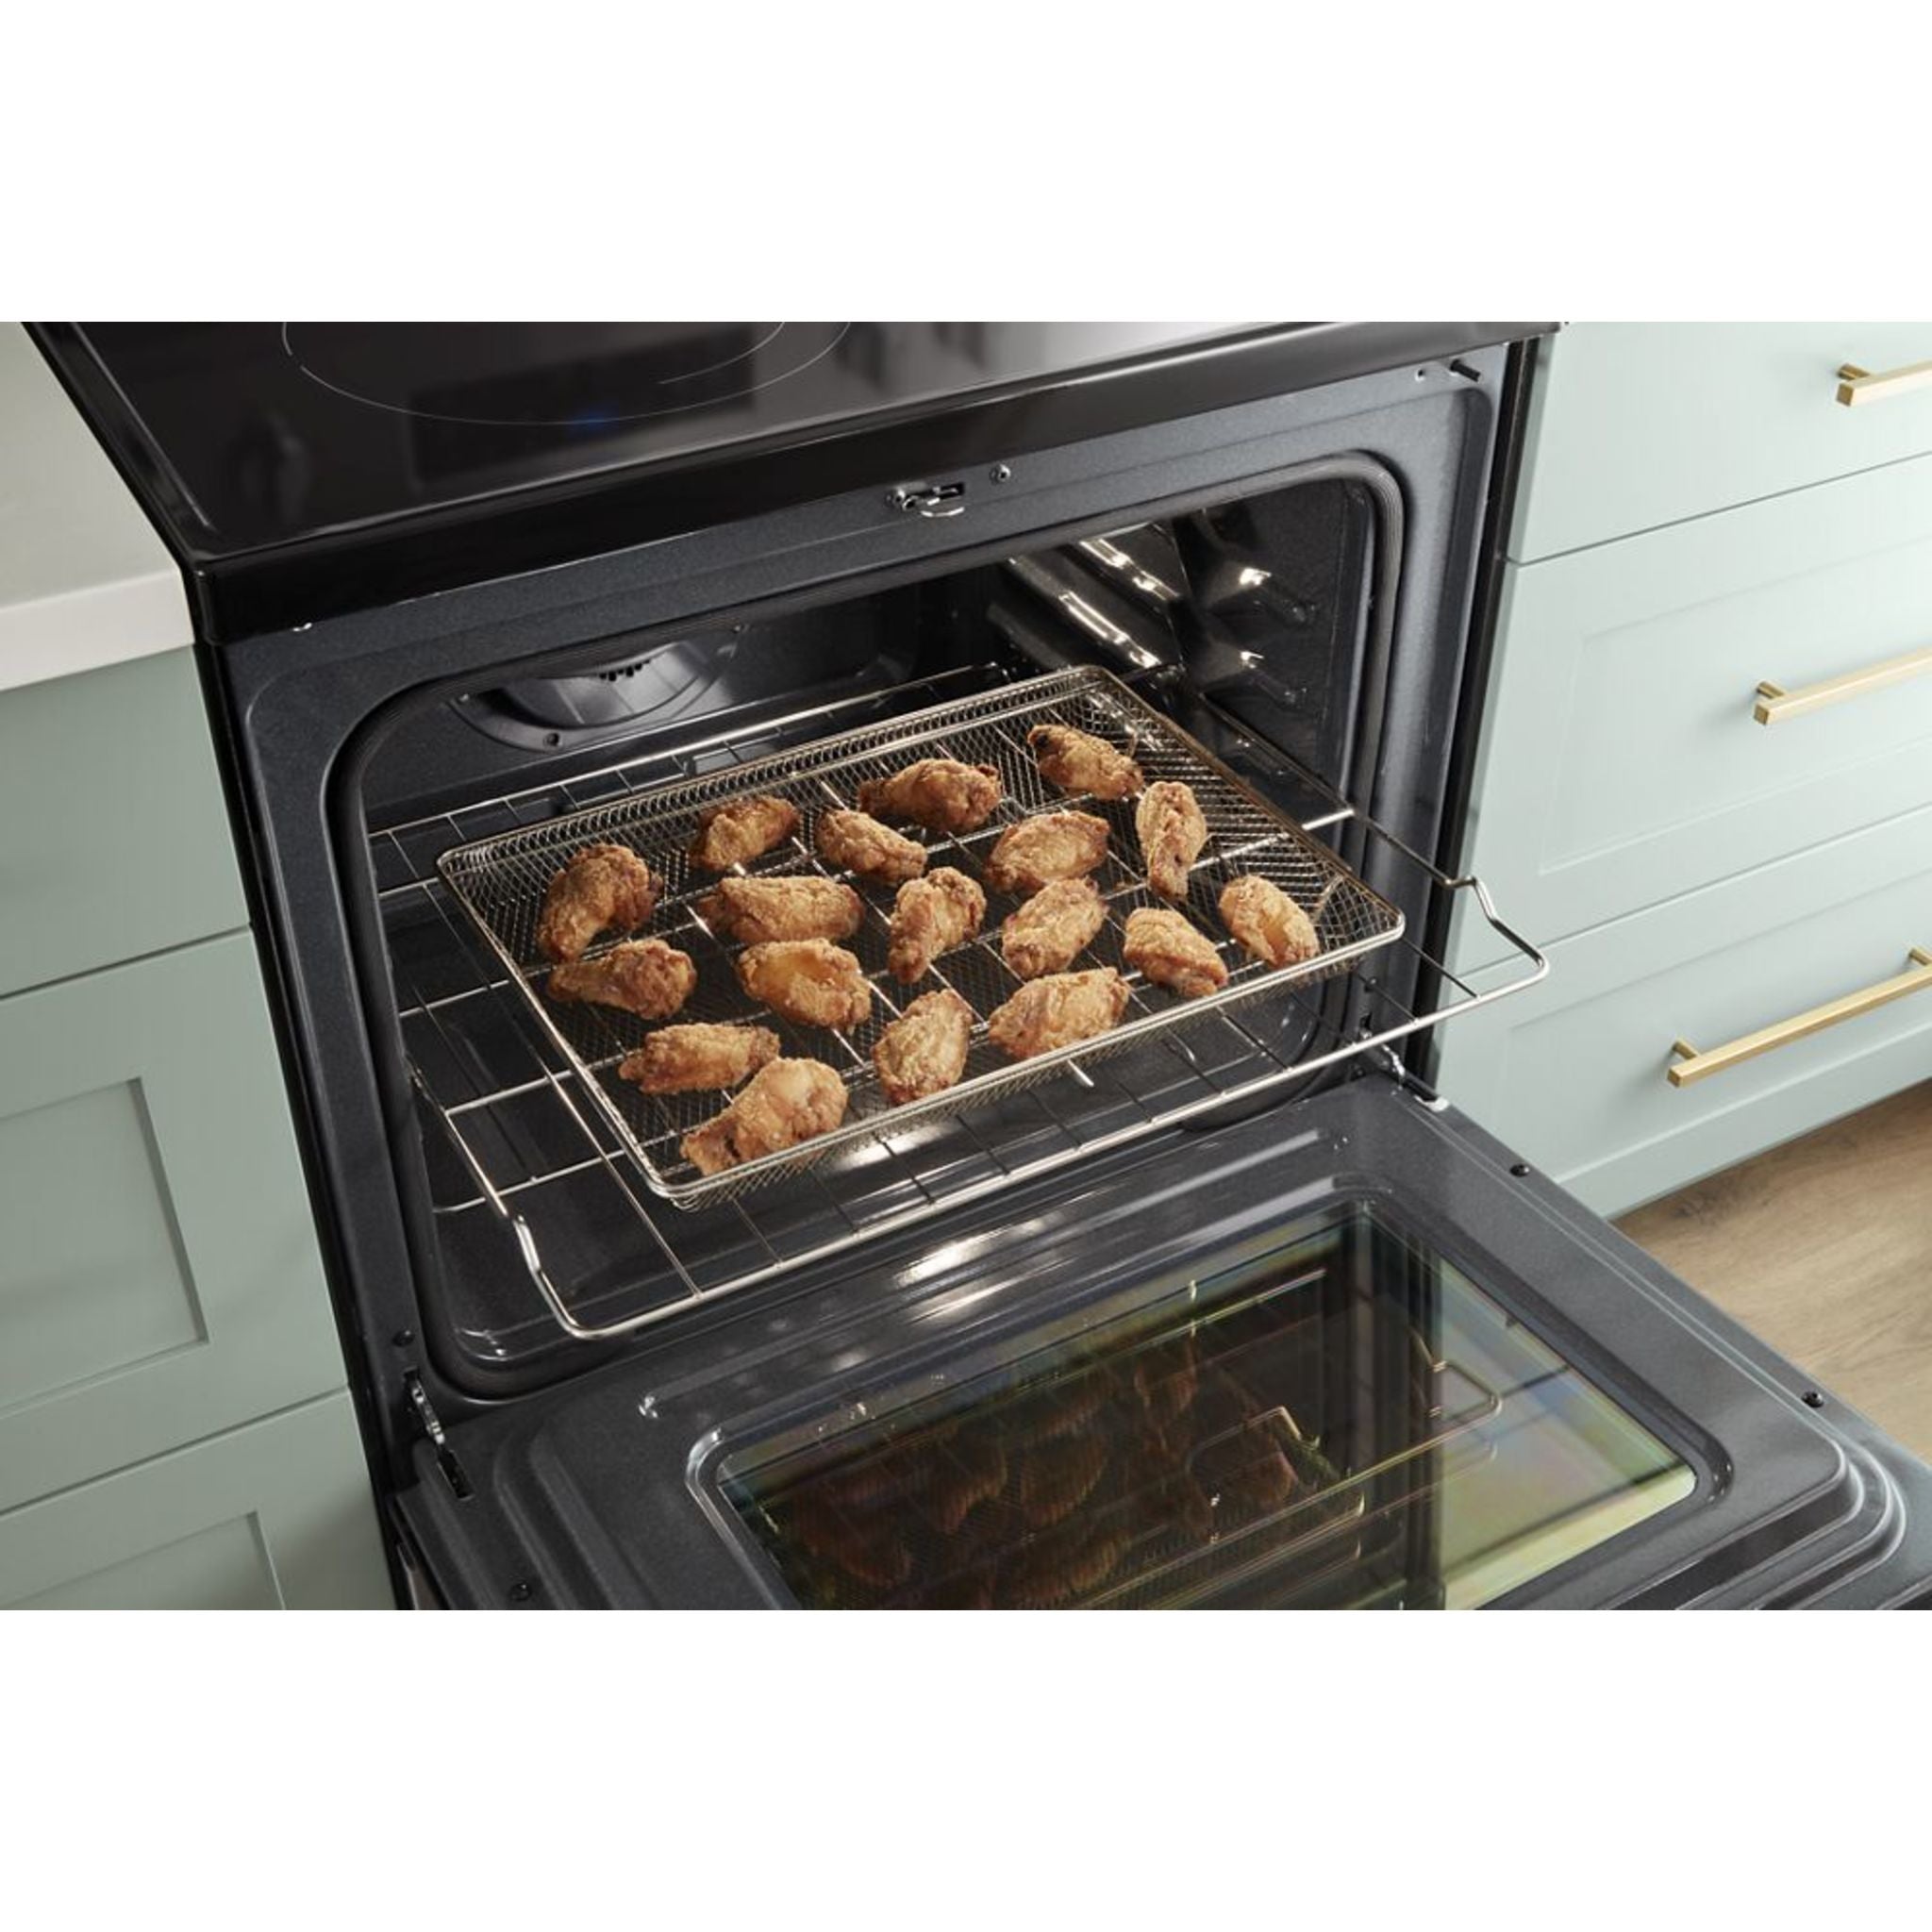 Whirlpool, 27" True Convection Wall Oven (WOED7027PZ) - Fingerprint Resistant Stainless Steel